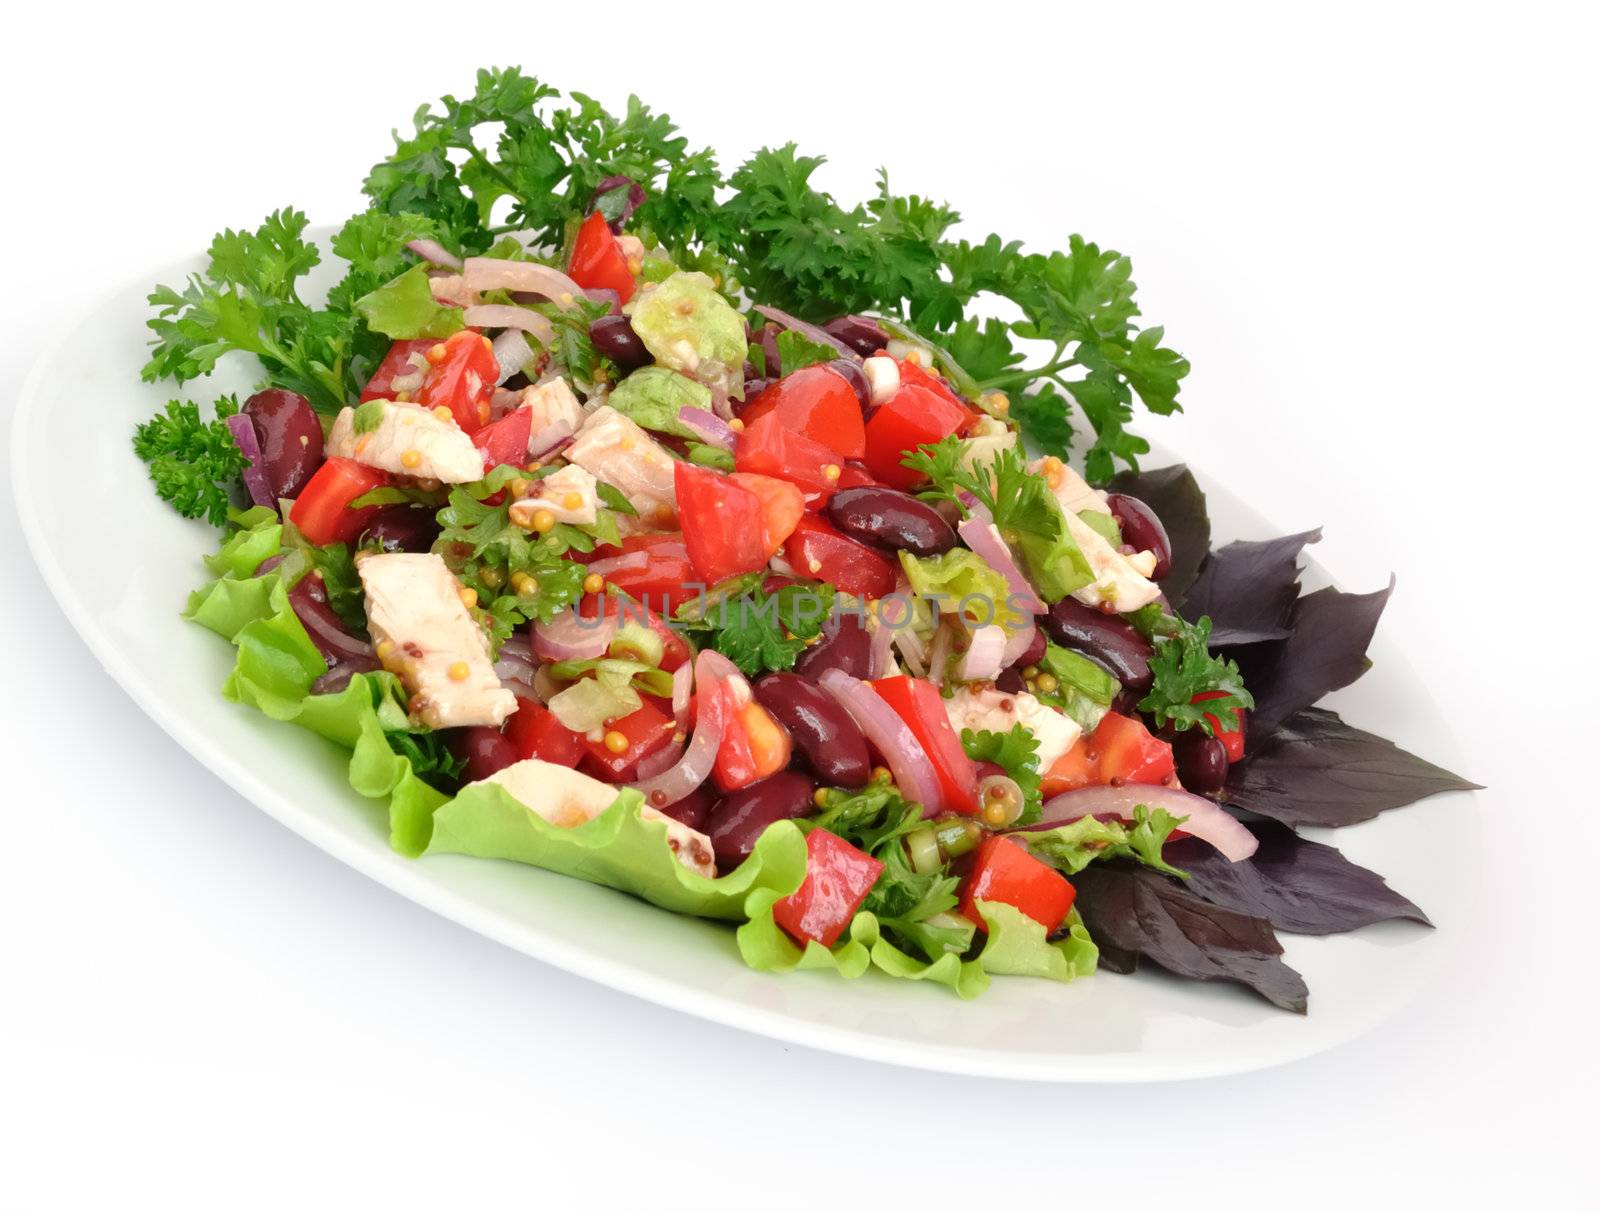 Salad with beans, tomatoes and chicken breast, lettuce, onions in mustard sauce with garlic